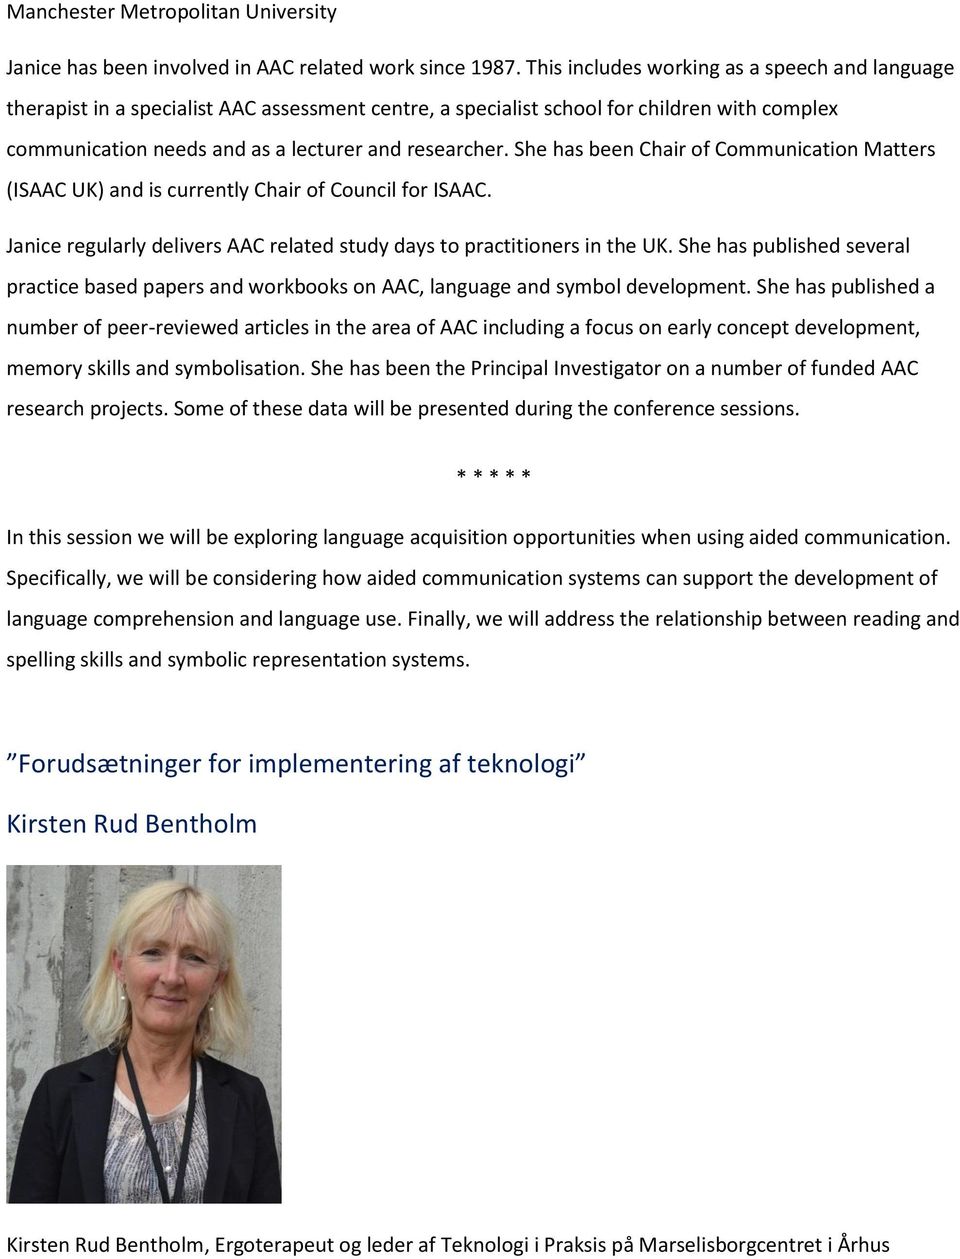 She has been Chair of Communication Matters (ISAAC UK) and is currently Chair of Council for ISAAC. Janice regularly delivers AAC related study days to practitioners in the UK.